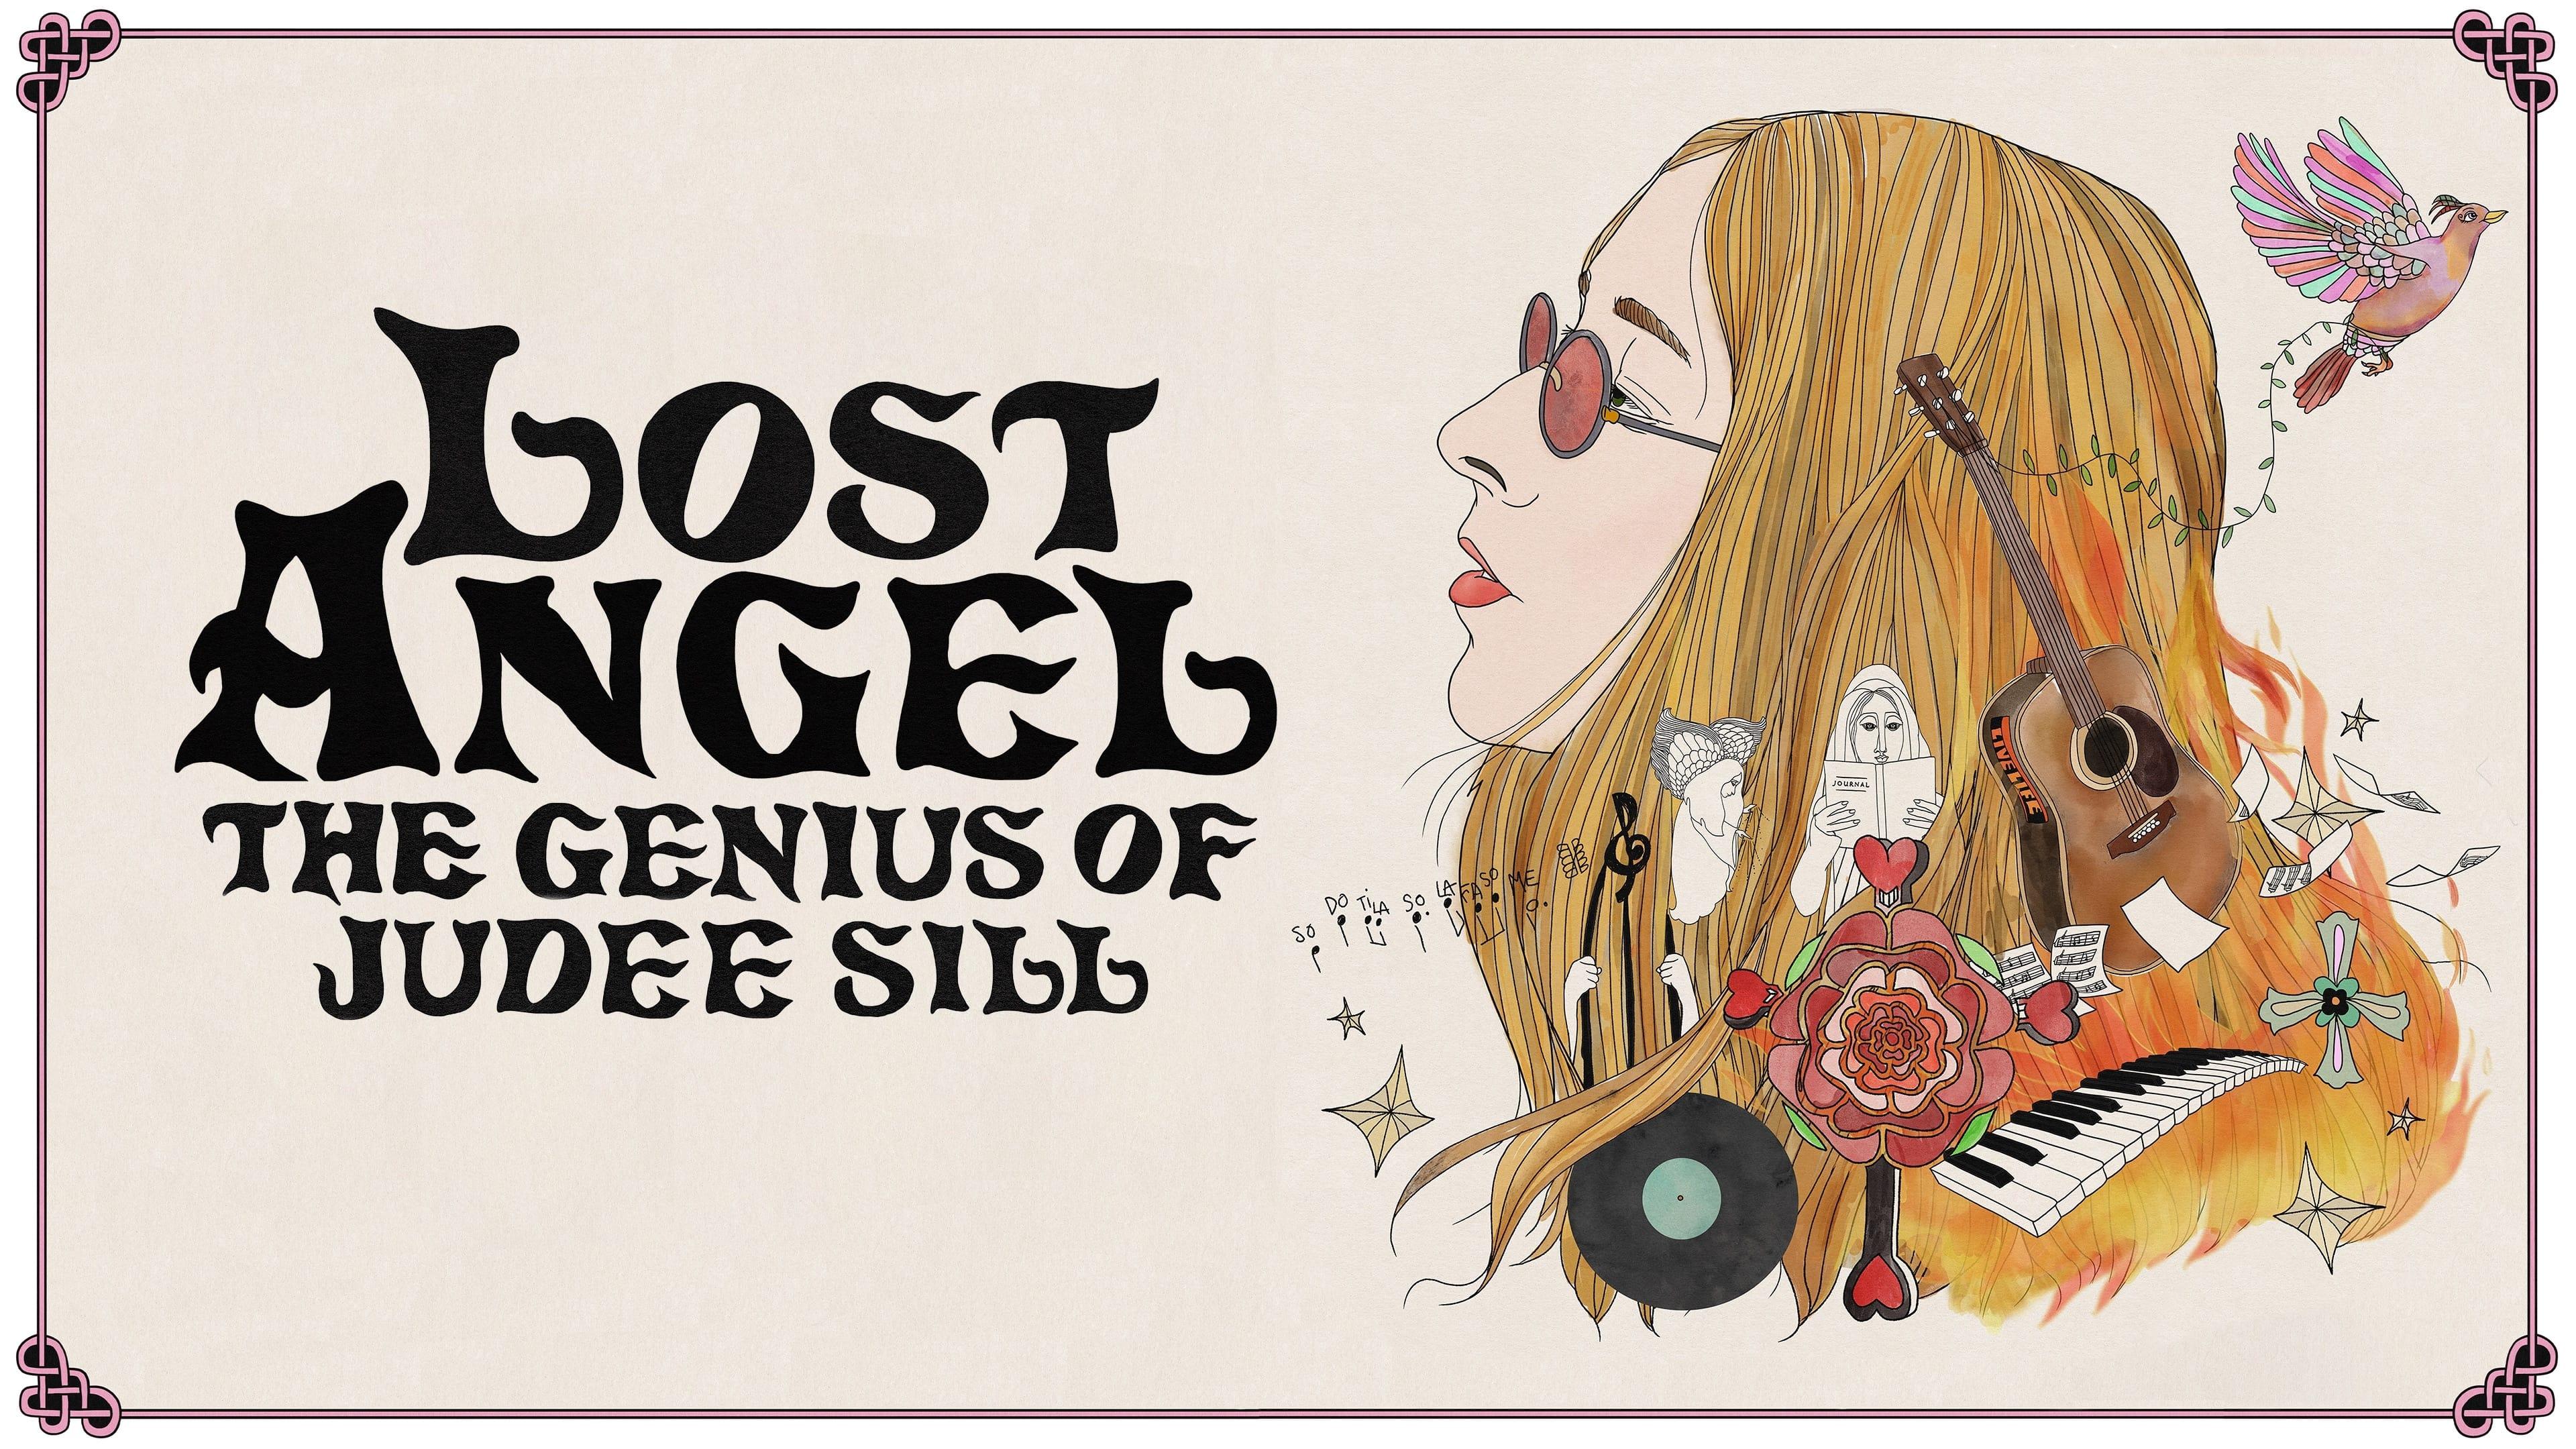 Lost Angel: The Genius of Judee Sill backdrop